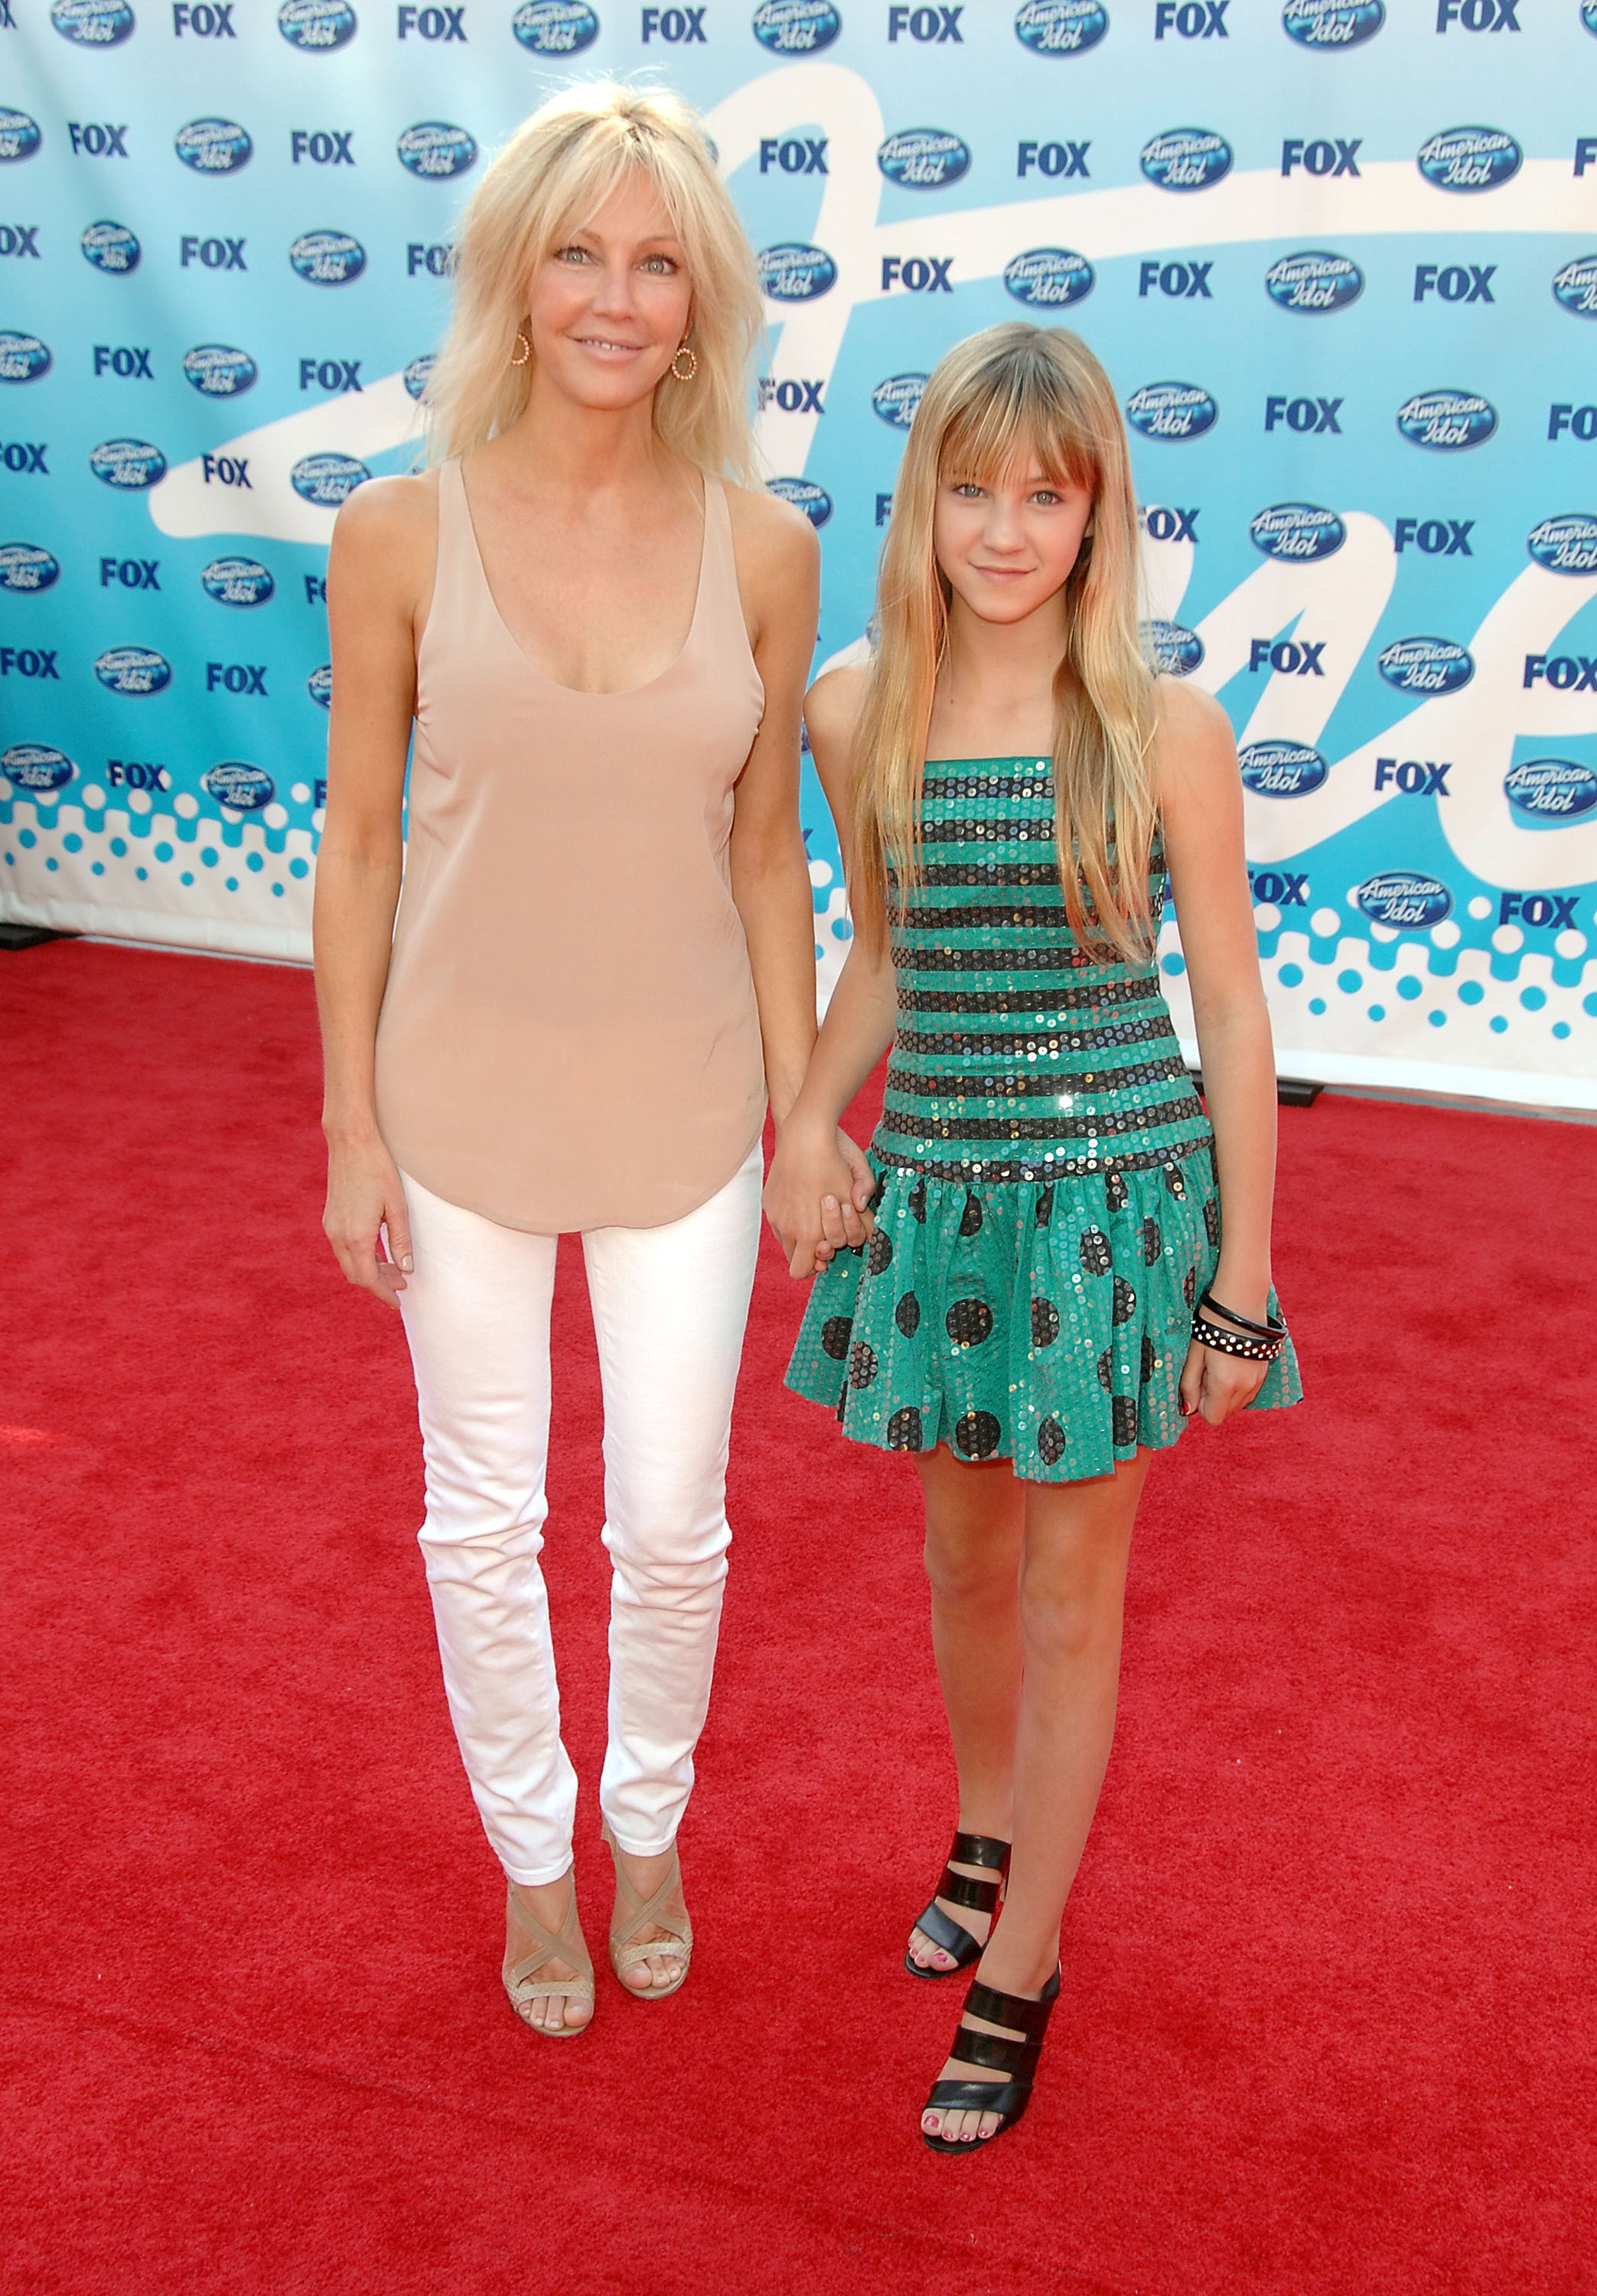 Actress Heather Locklear arrives at the American Idol Season 8 Grand Finale at Nokia Theatre L.A. Live on May 20, 2009 in Los Angeles, California | Source: Getty Images